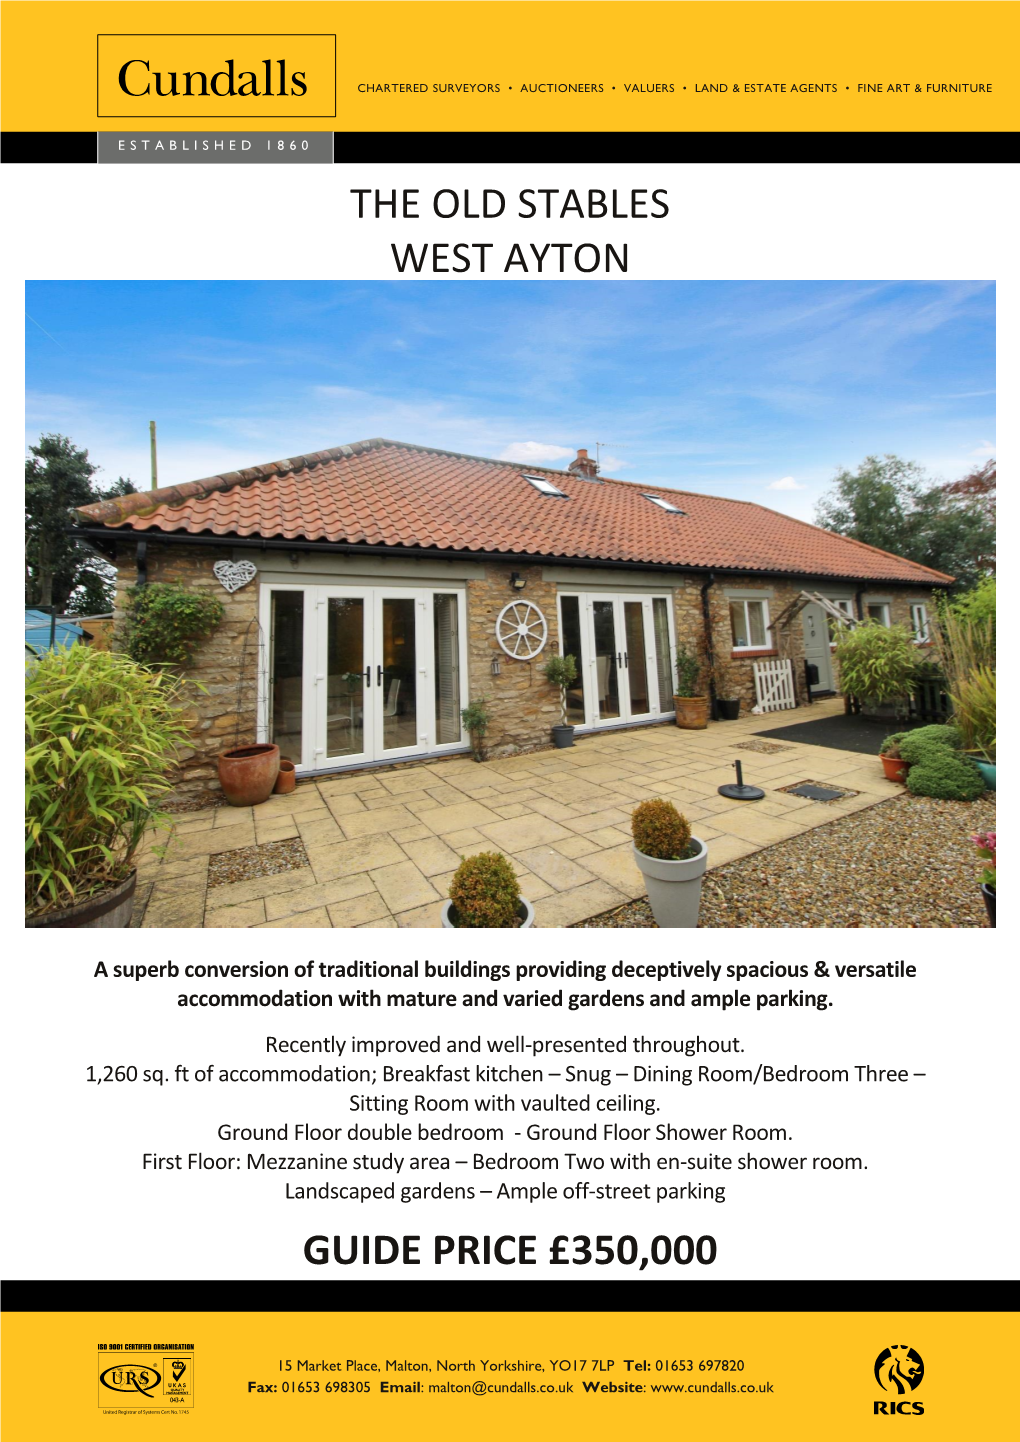 The Old Stables West Ayton Guide Price £350,000